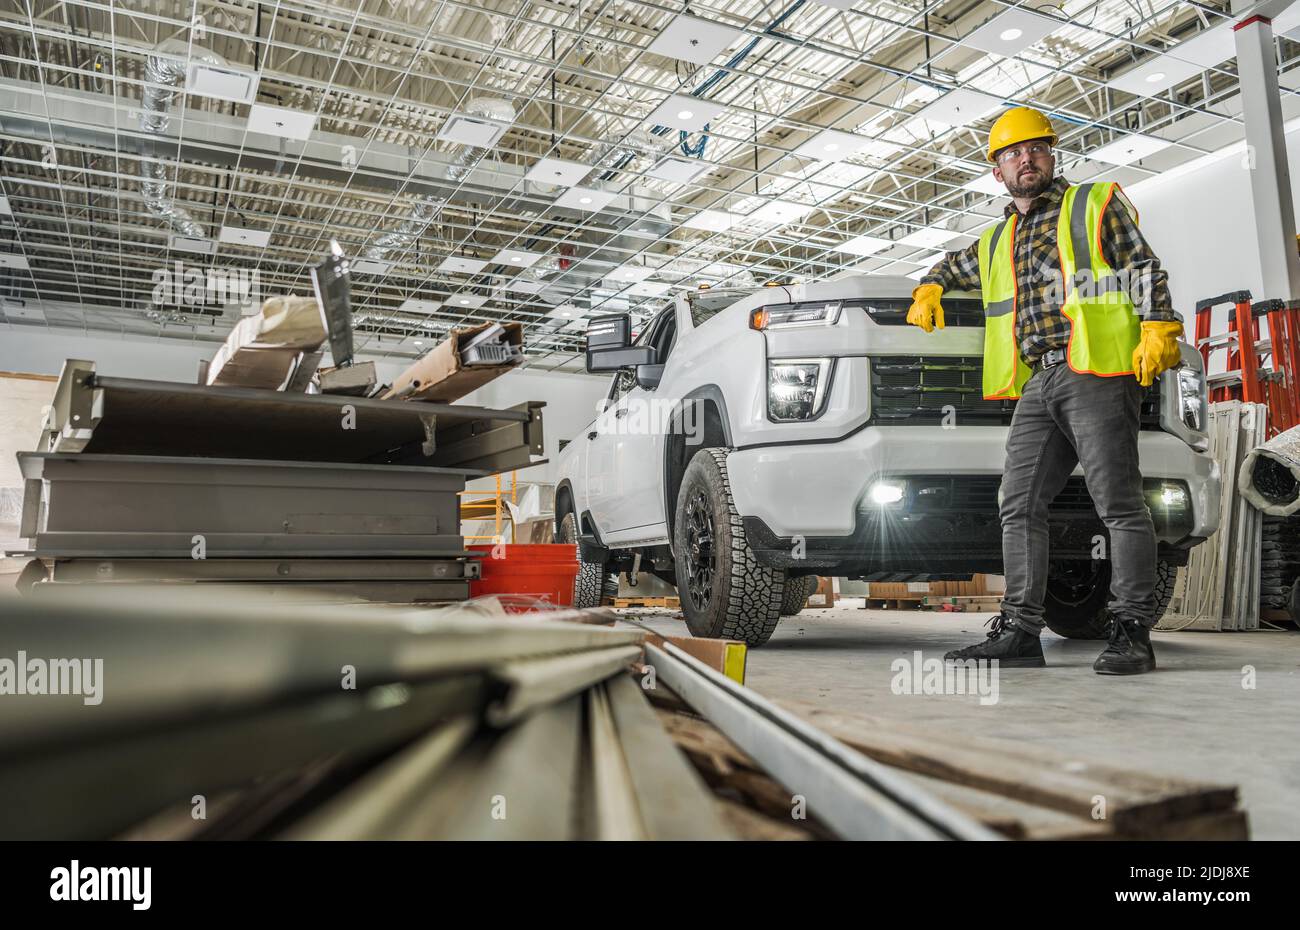 Caucasian Worker Wearing Yellow Hard Hat Inside Developed Warehouse Building Staying Next to His Modern Pickup Truck Commercial Vehicle. Stock Photo